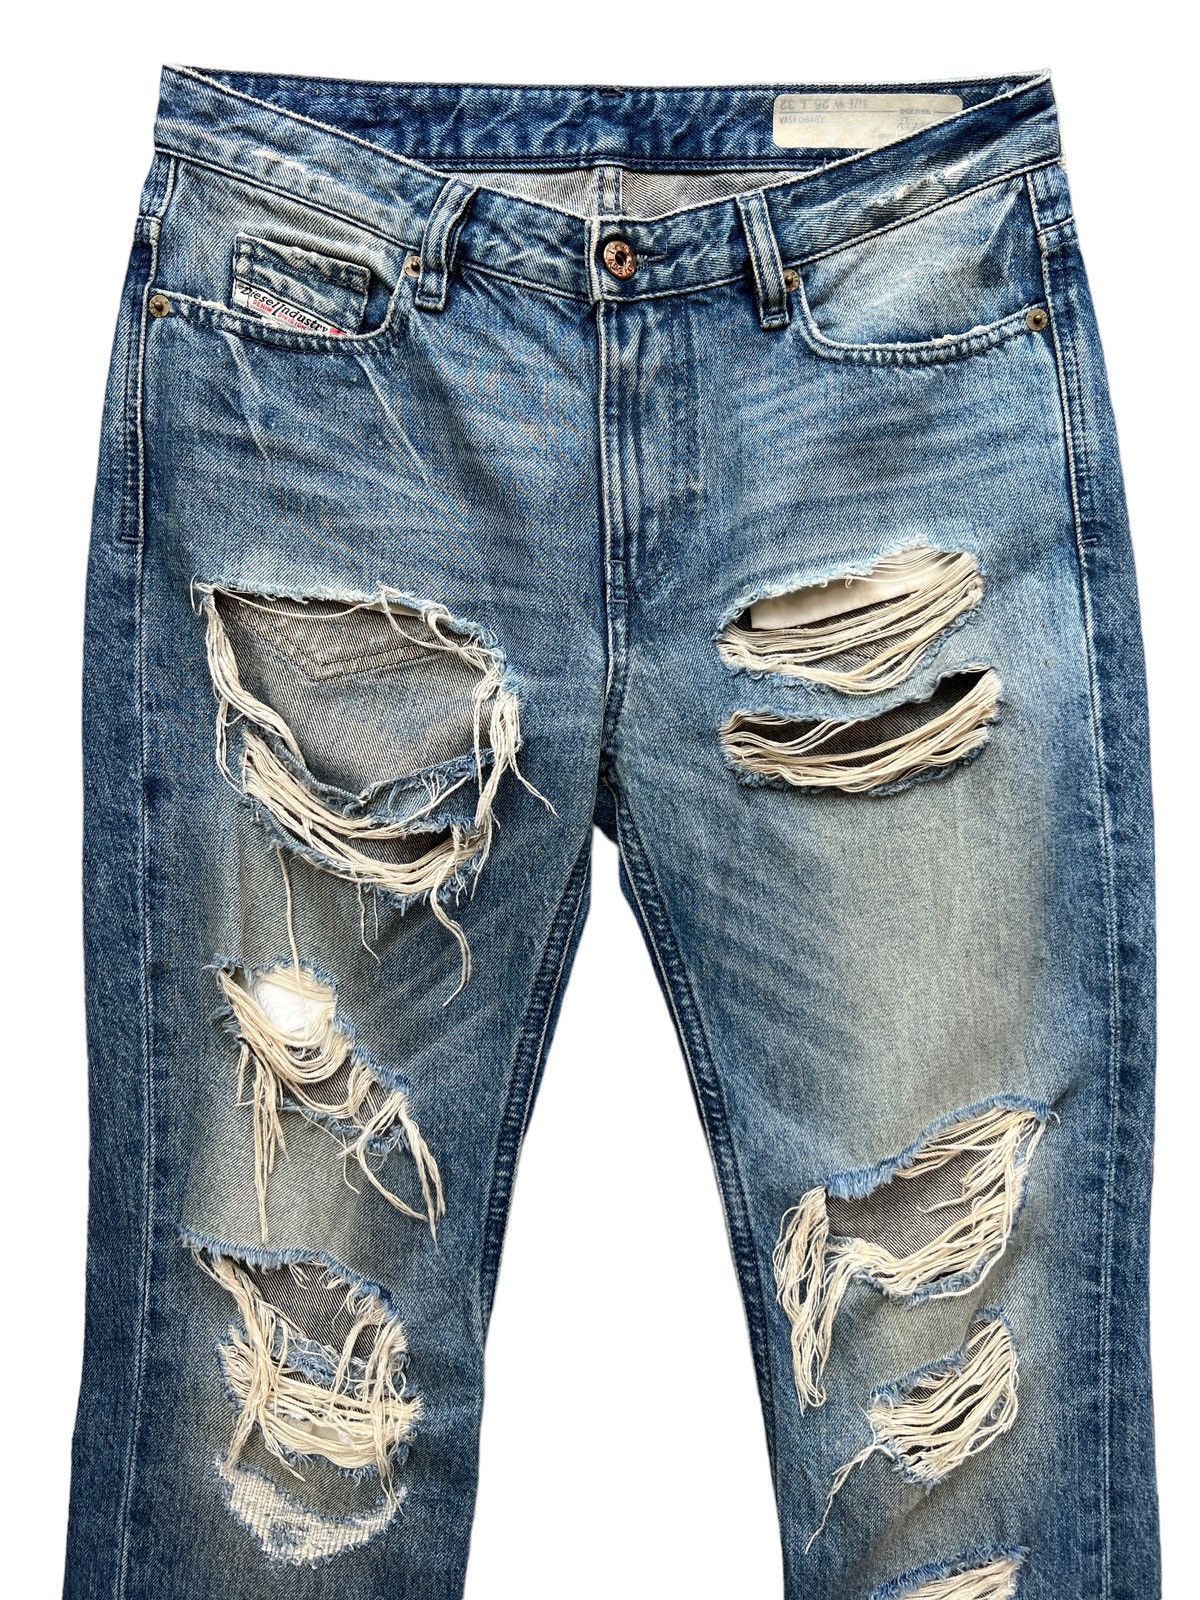 💥Rare💥 Diesel Distressed Ripped Thrashed Denim Jeans 31x31.5 - 4